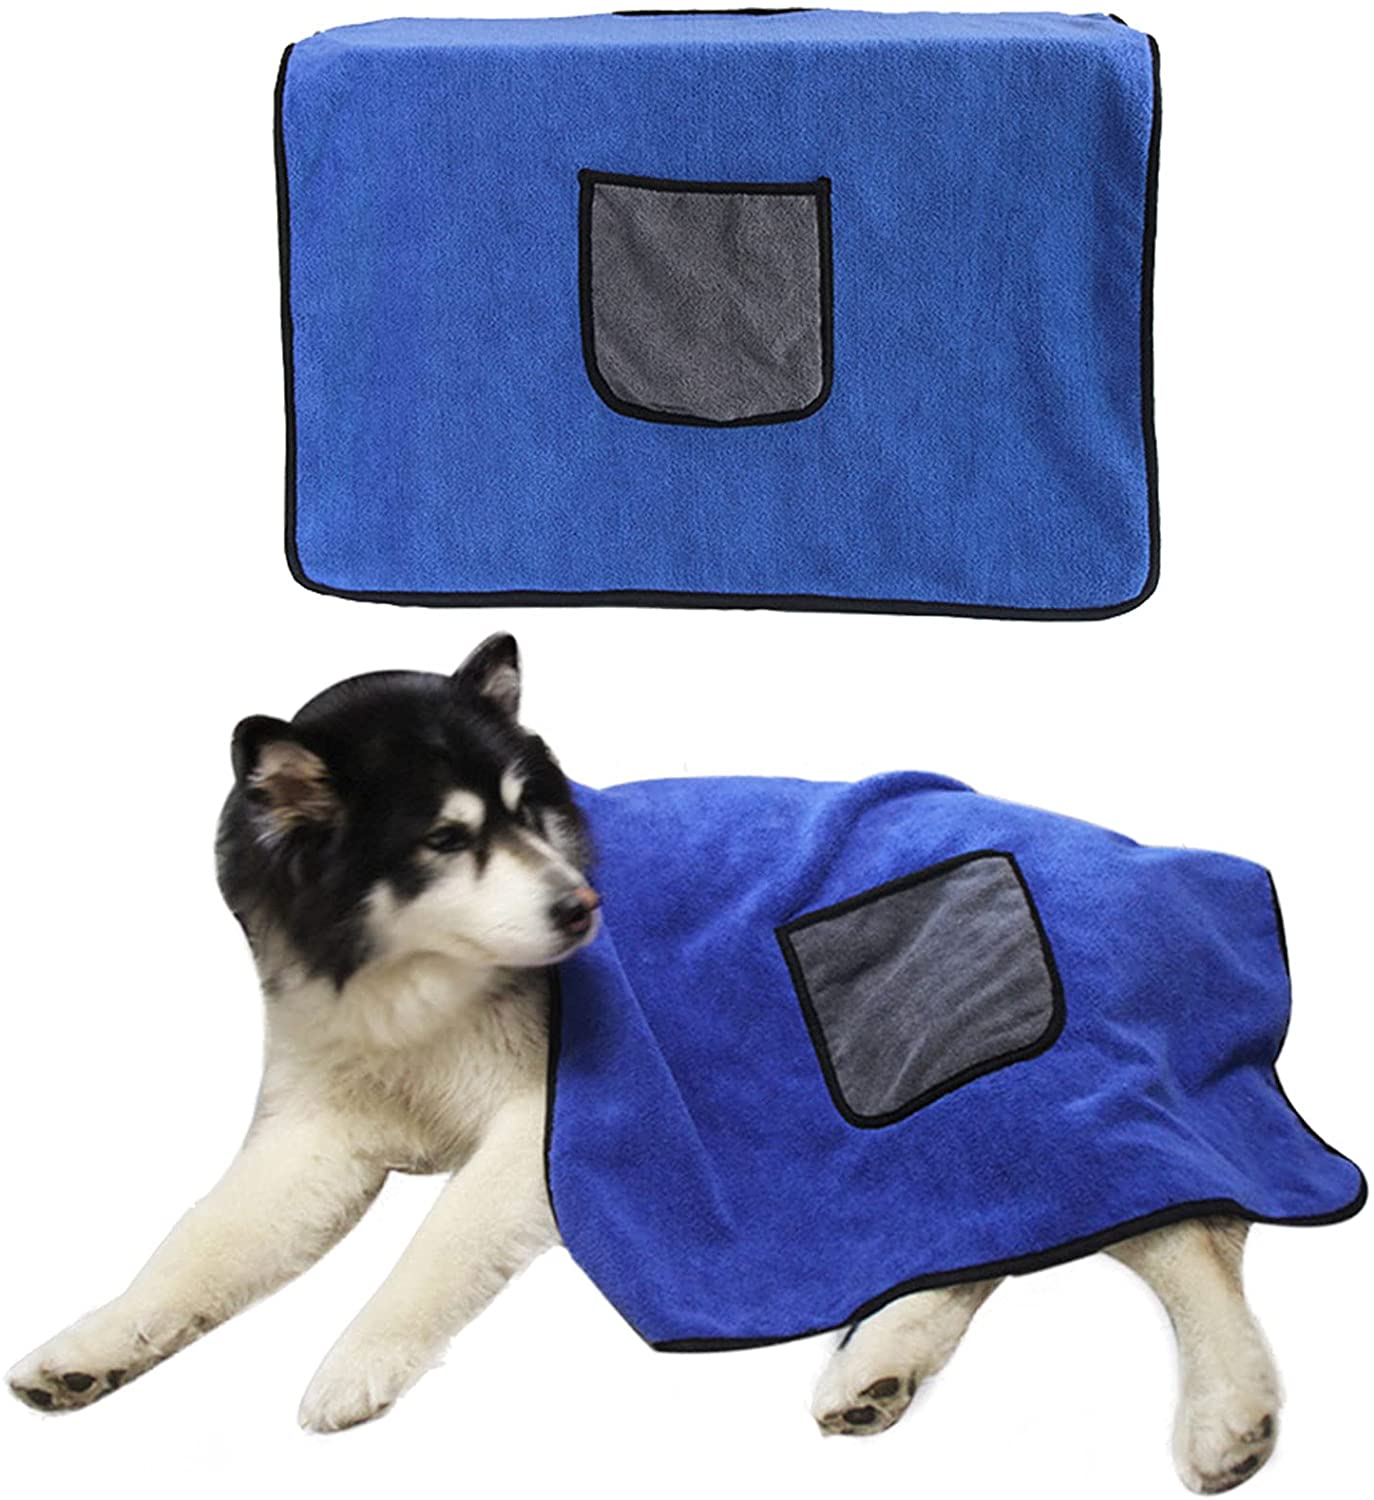 Super Absorbent Microfiber Quick Drying Towel With Handbag For Dog Pet Clean